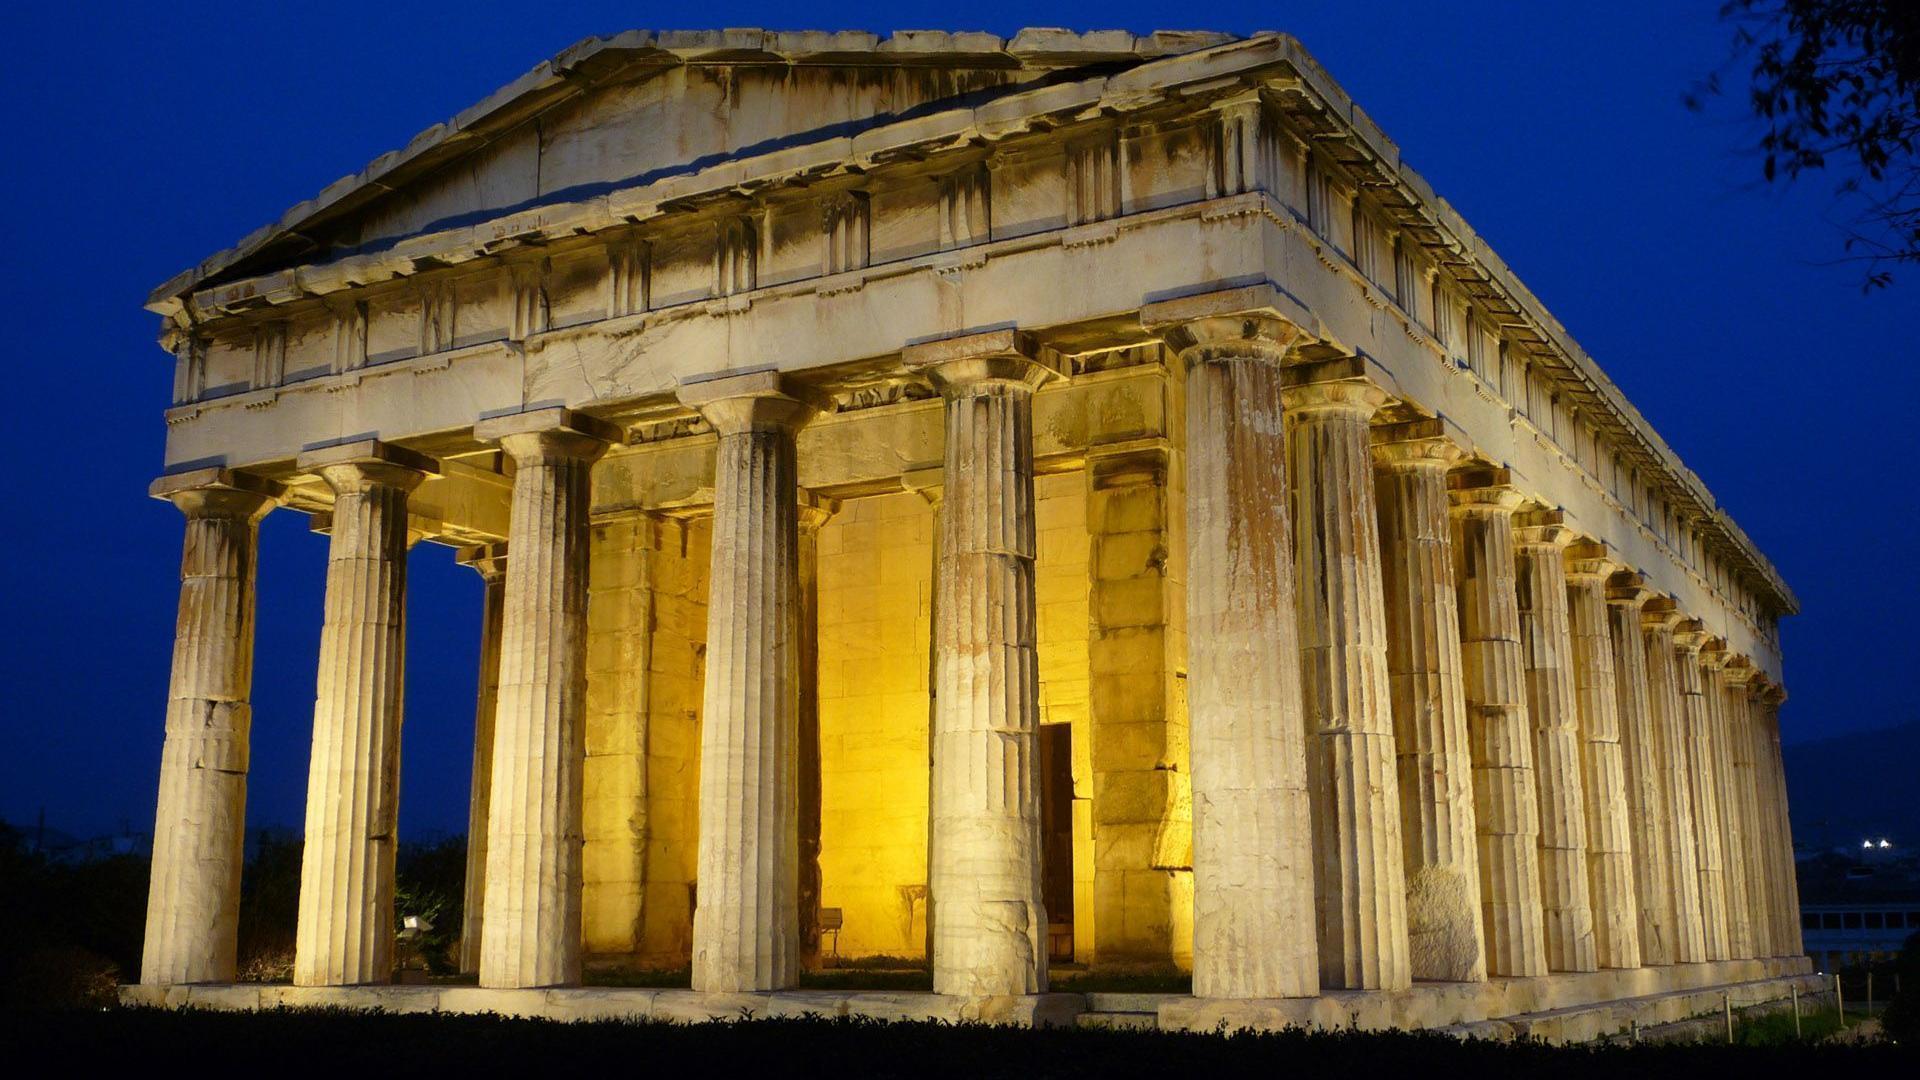 Parthenon 2K Desk 4K Wallpapers for Widescreen, High Definition